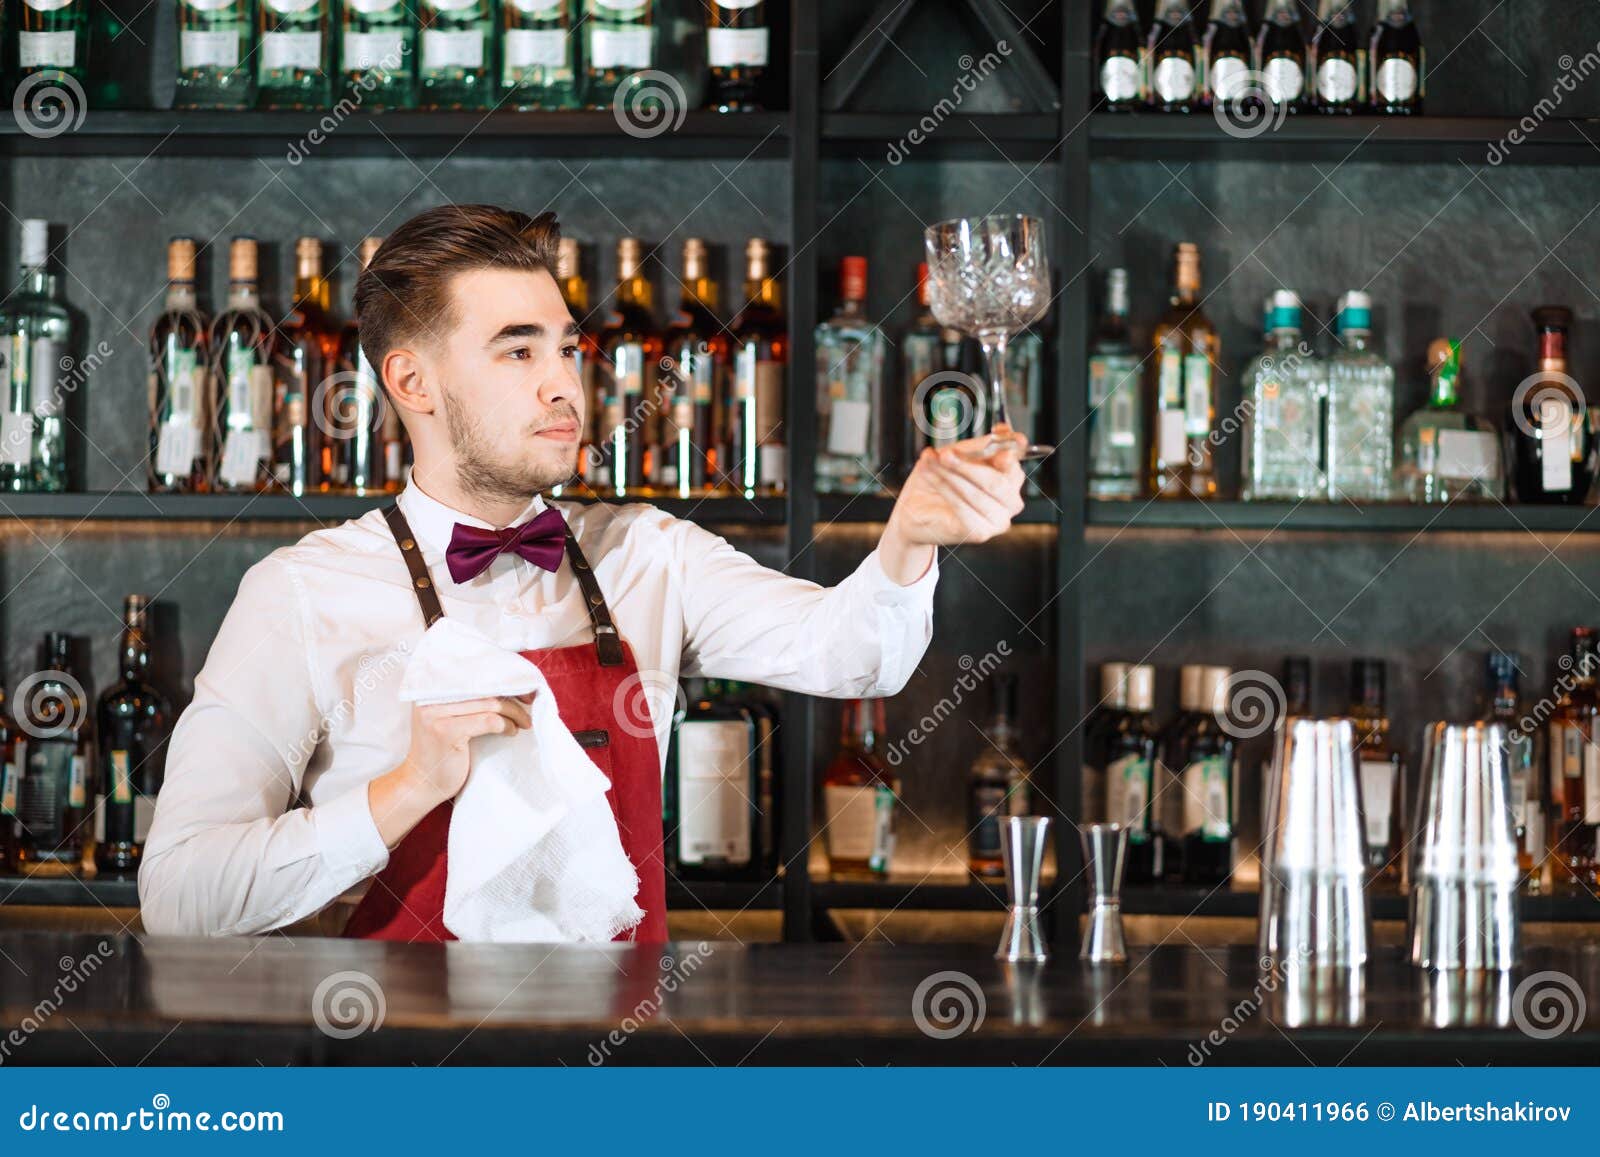 https://thumbs.dreamstime.com/z/bartender-standing-bar-counter-cleaning-glasses-towel-young-handsome-smiling-barman-interior-wiping-vine-professional-190411966.jpg